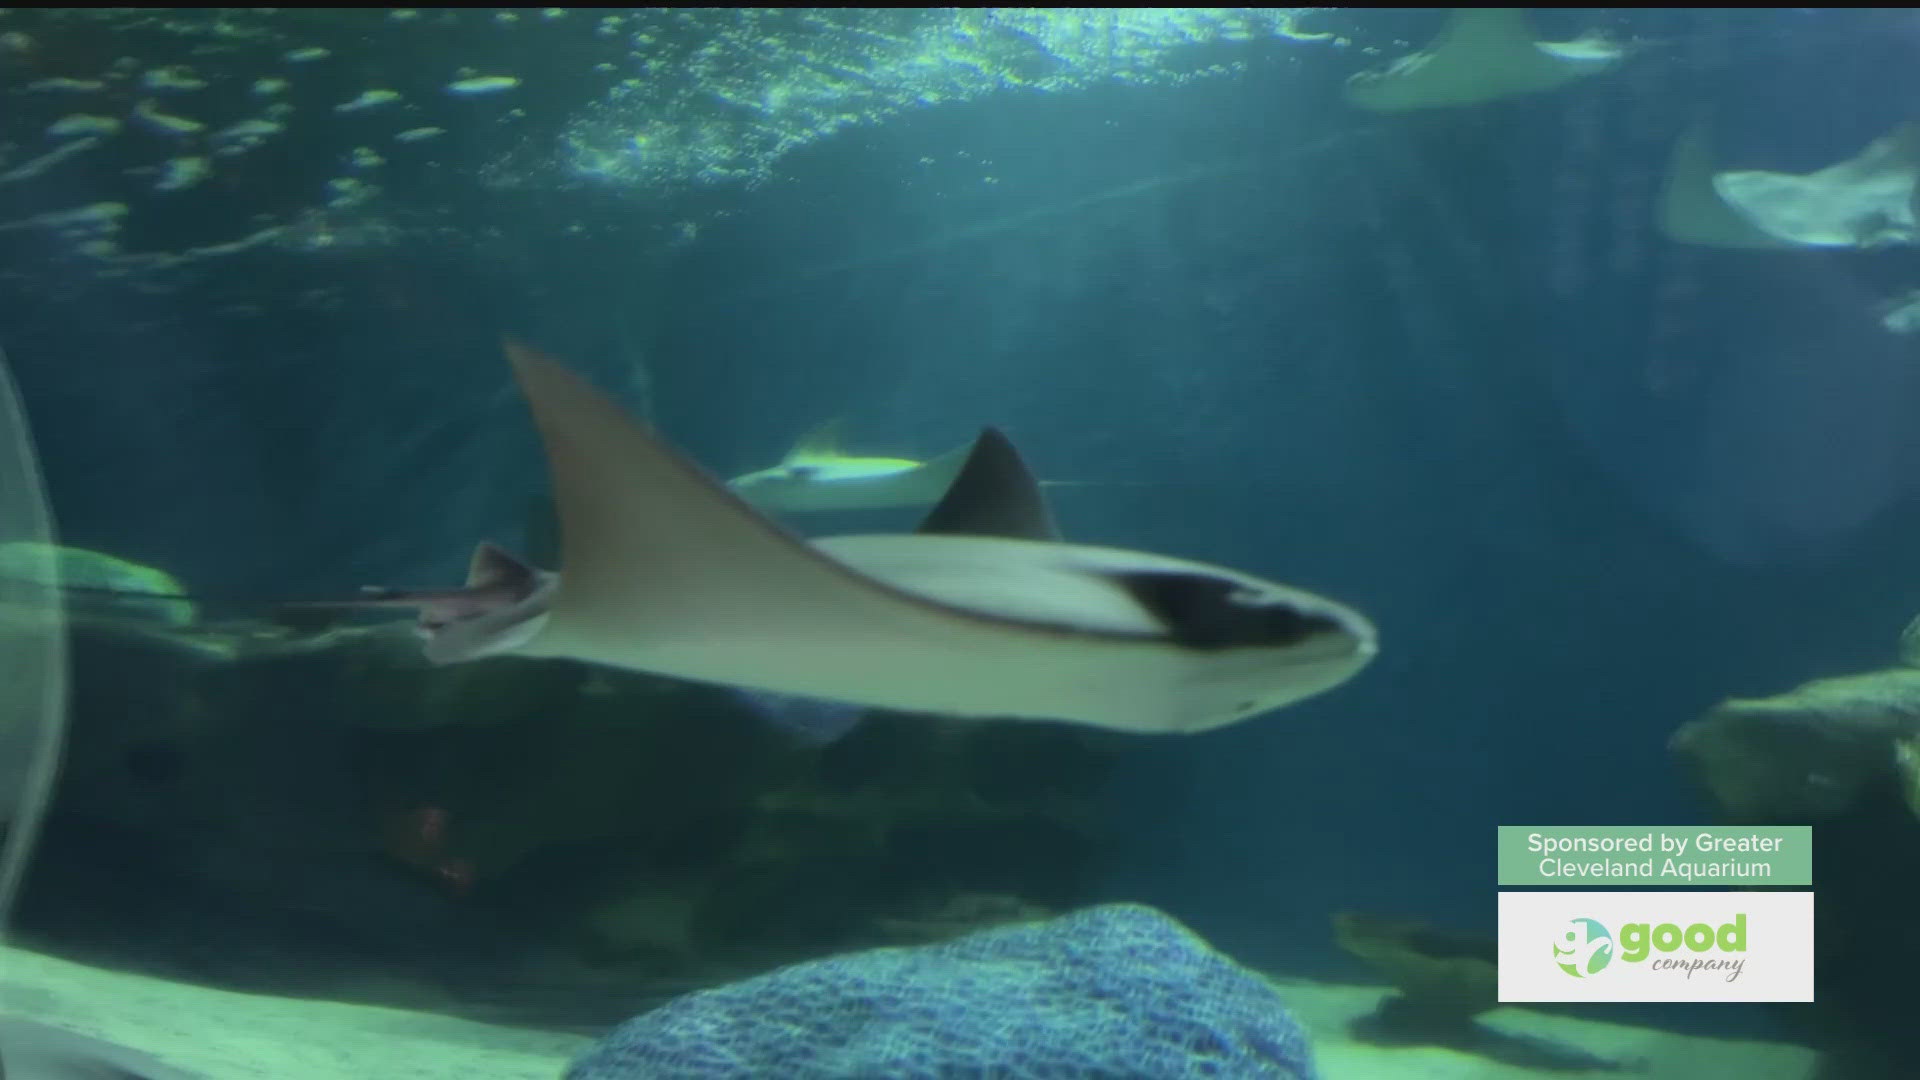 Joe talks with Stephanie White about the great trip you can take with your mom to the aquarium for Mother's Day! Sponsored by: Greater Cleveland Aquarium